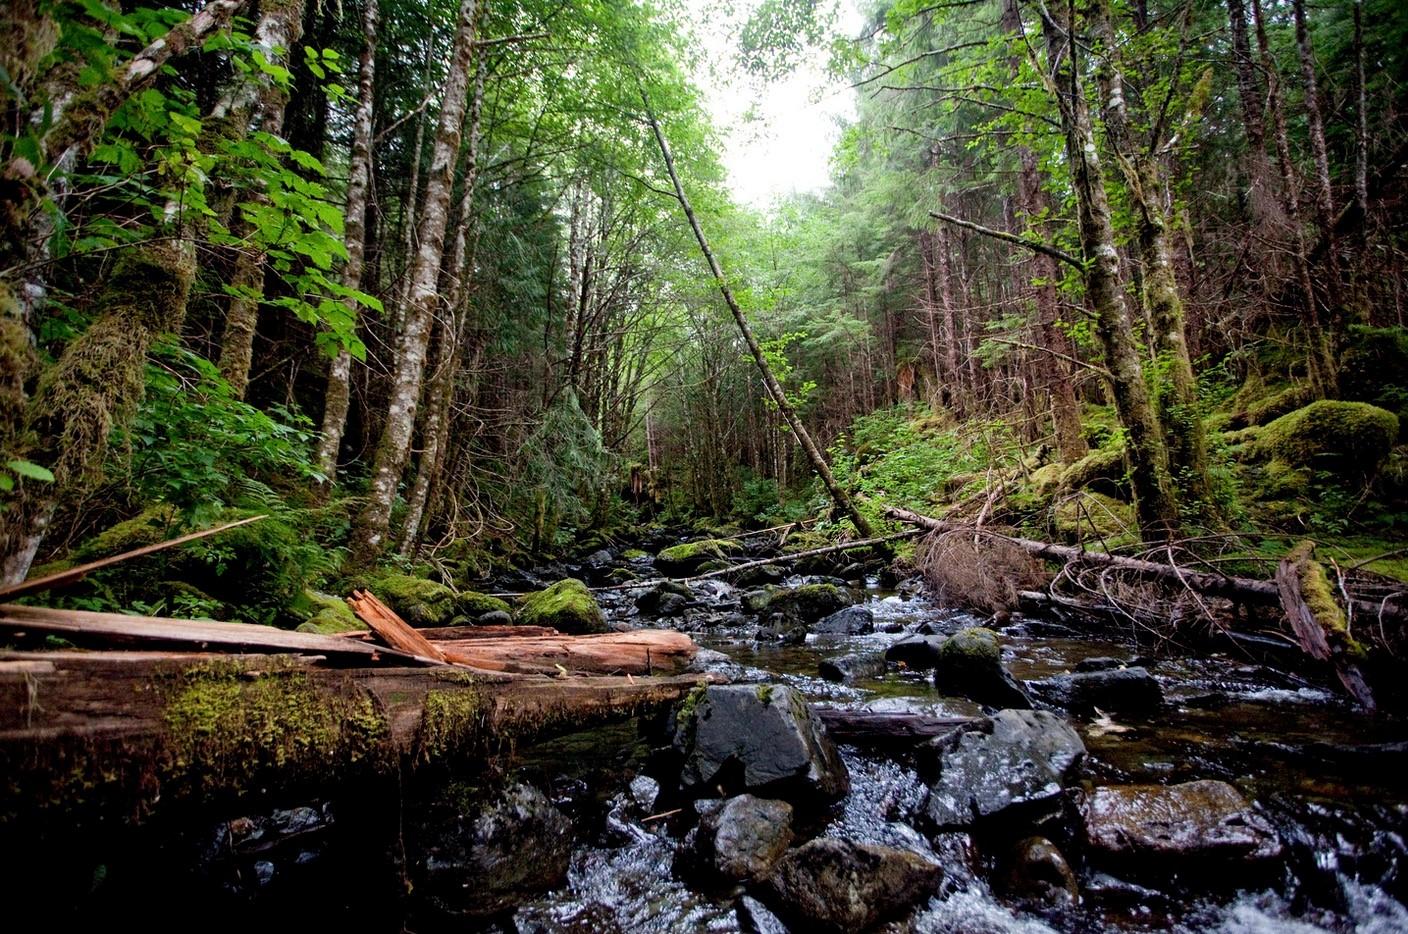 Tongass National Forest, home to Sitka spruce. Photo credit: RA Beattie/Musicians for Forests